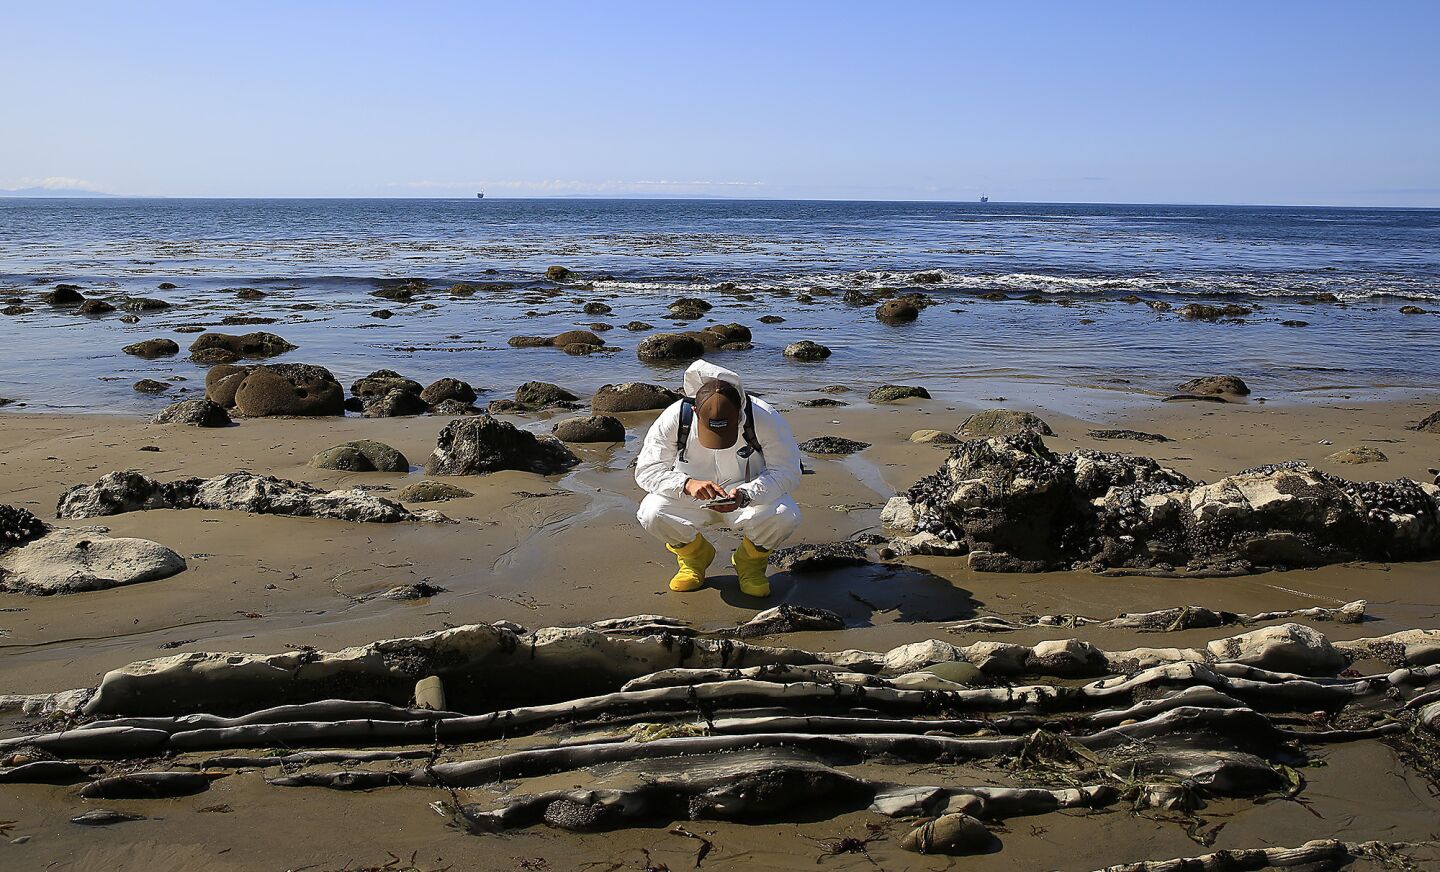 Nicholas Schooler, UCSB Marine Science Institute graduate student conducts natural resource damage assessments in the aftermath of the oil spill on the Gaviota coast.